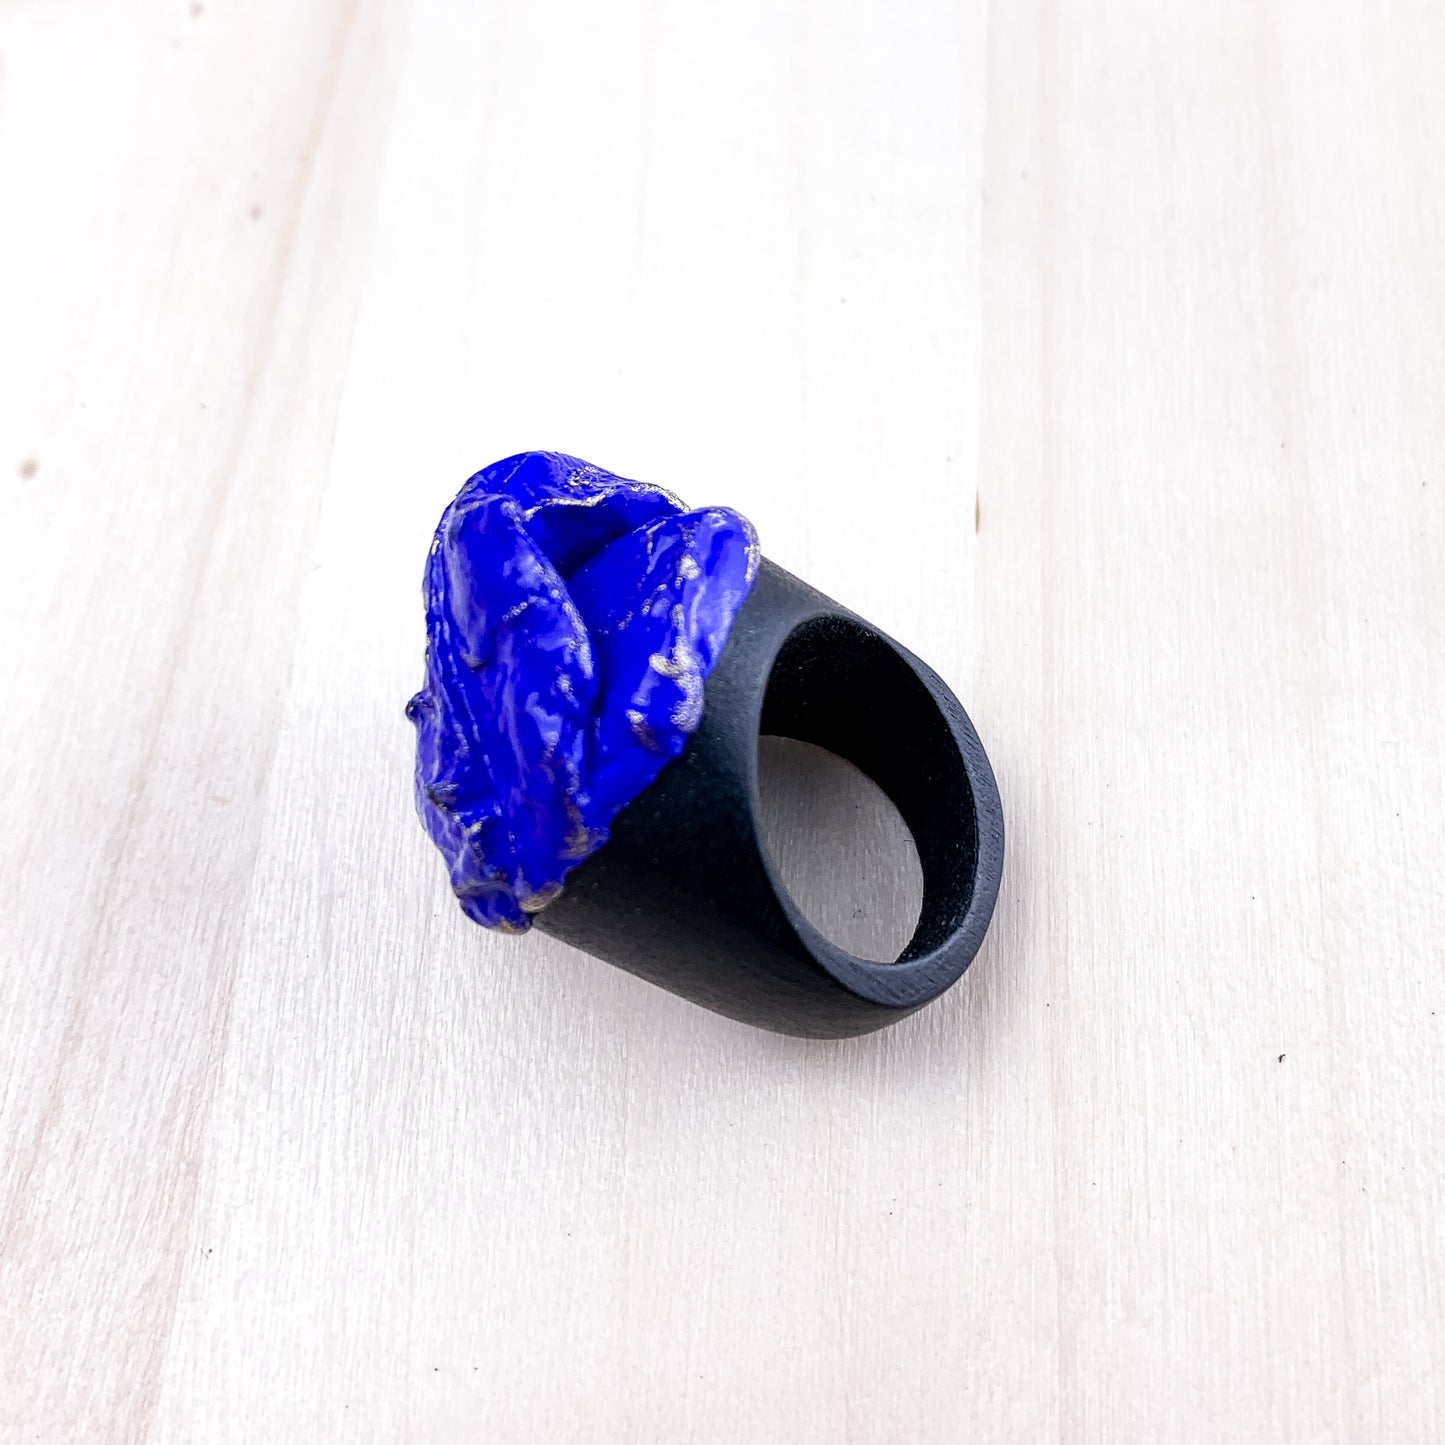 Wood and resin scented ring